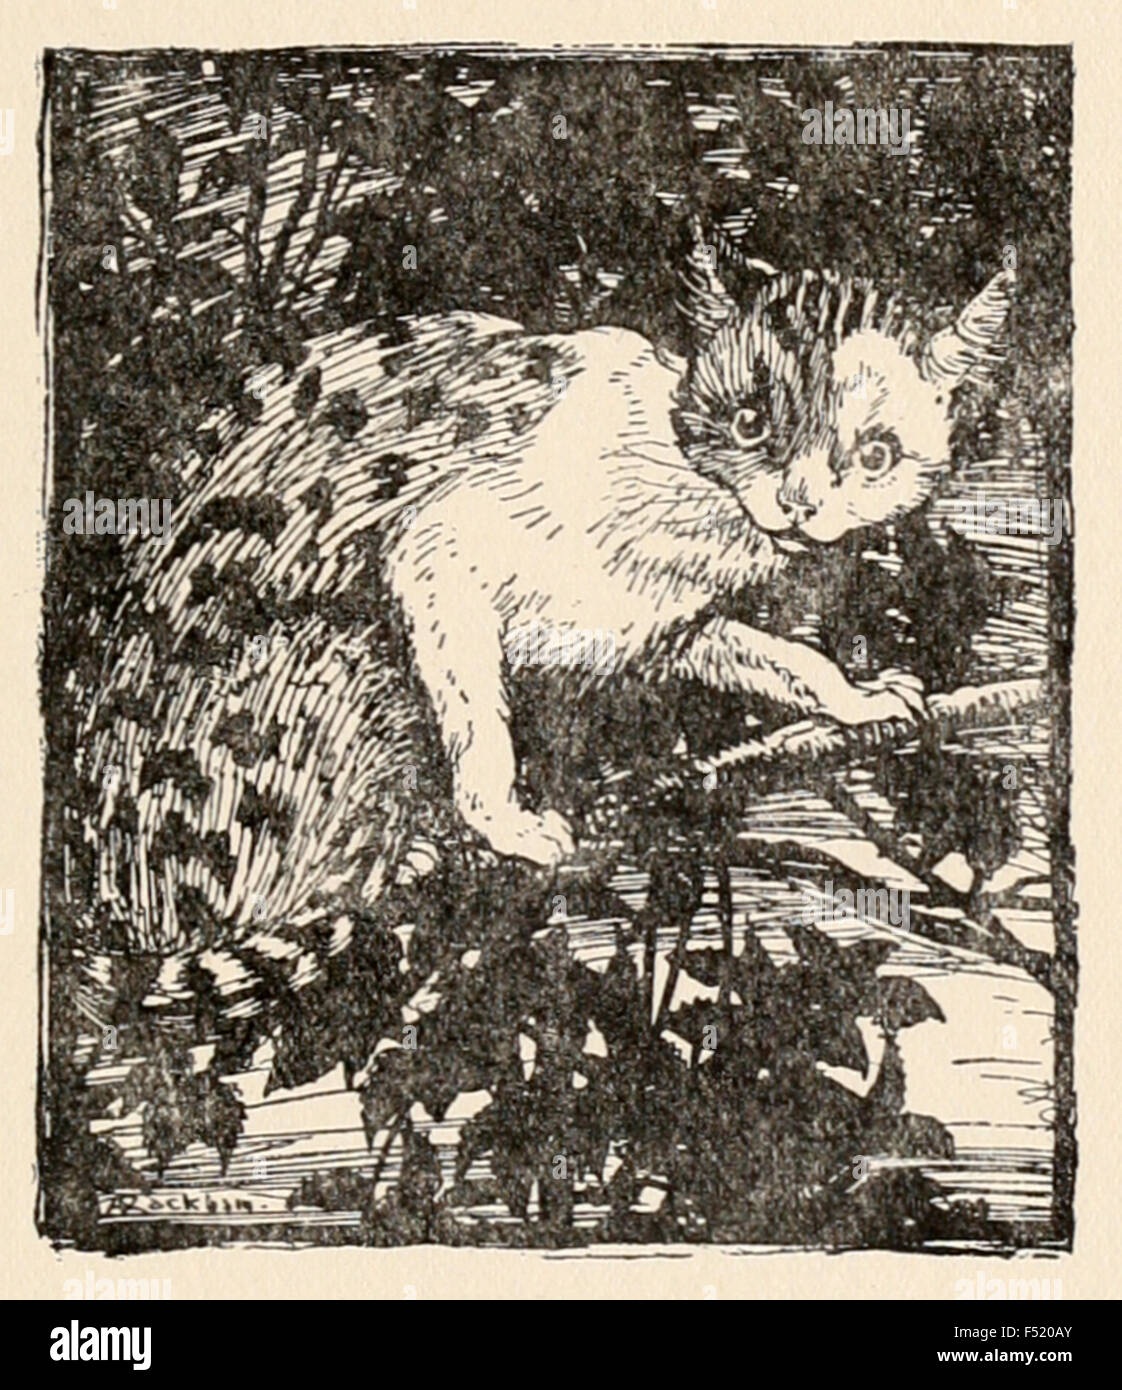 'The Cat crept stealthily up to the topmost branch.' from 'The Fox and the Cat' in ‘The Fairy Tales of the Brother's Grimm', illustration by Arthur Rackham (1867-1939). See description for more information. Stock Photo